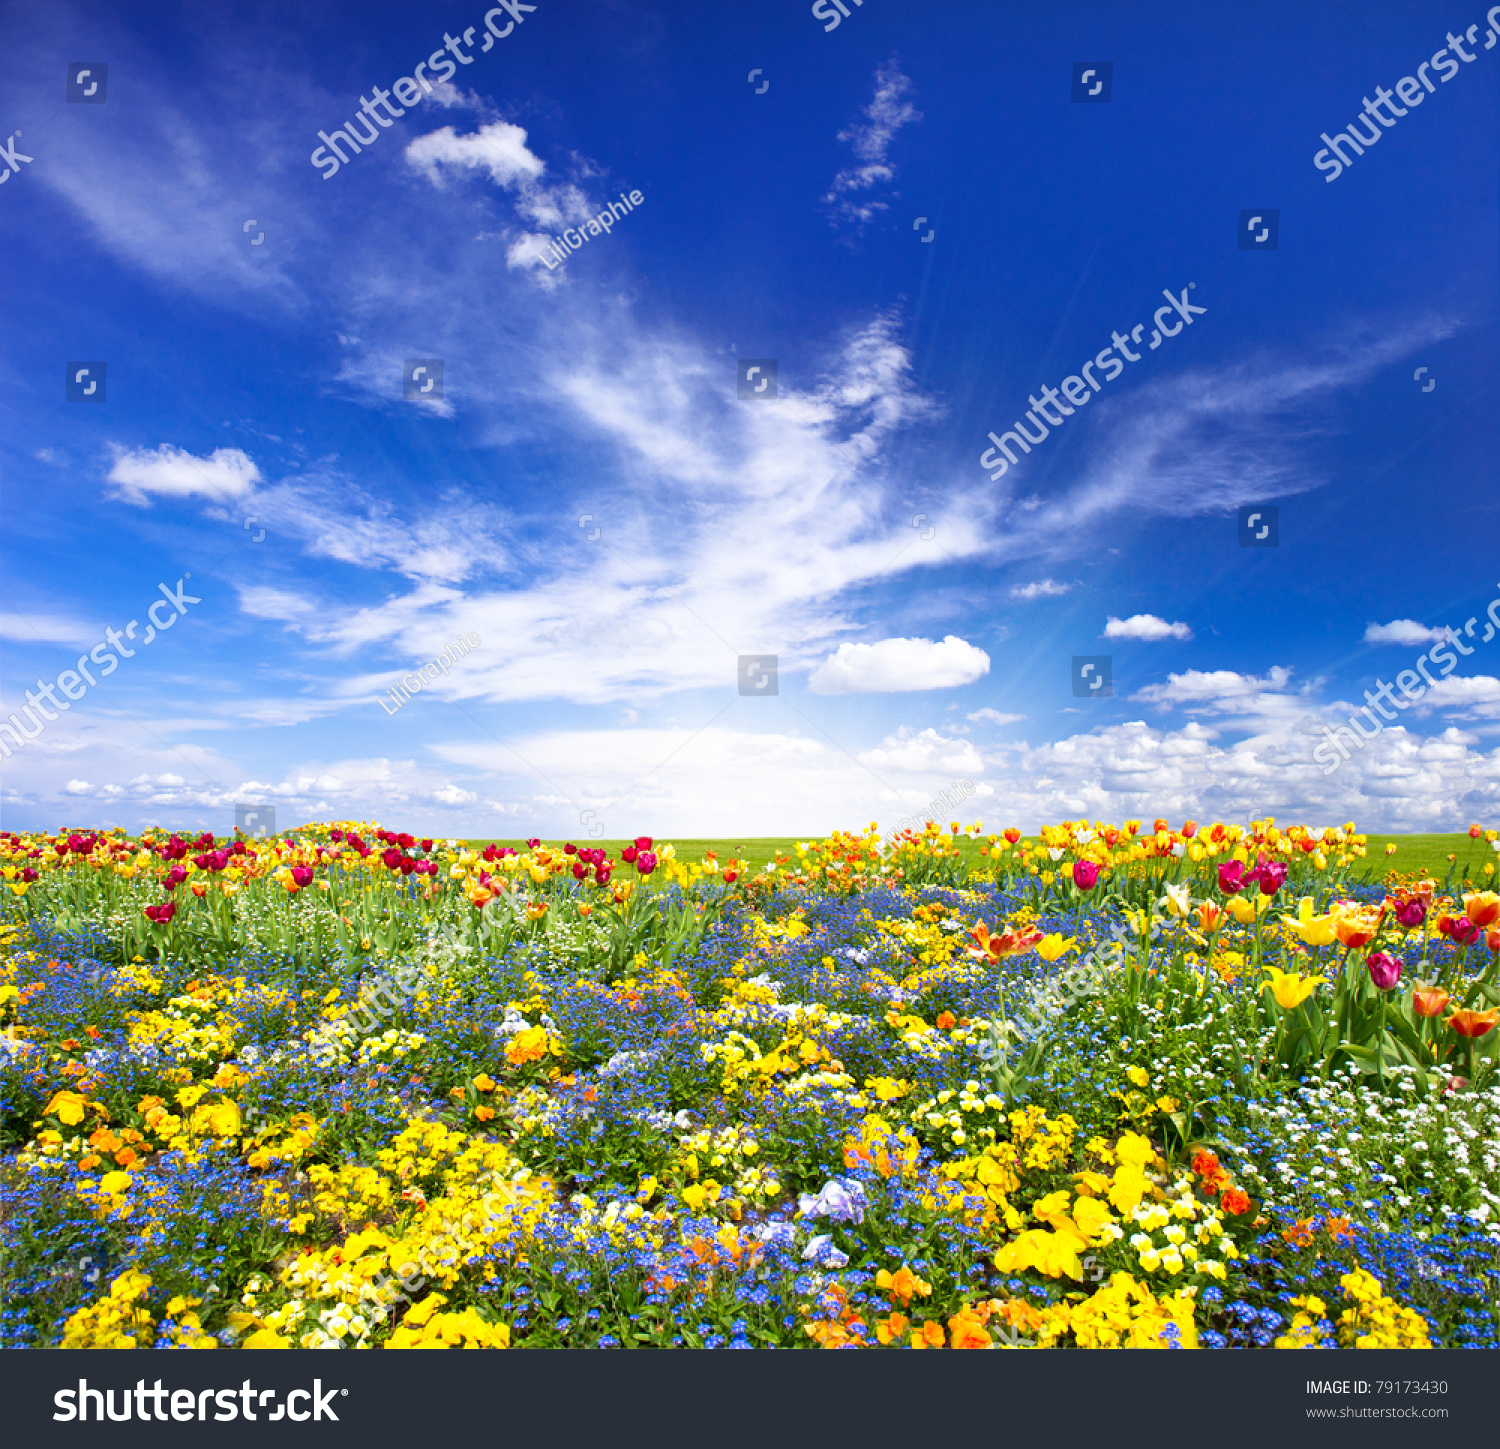 Flowerbed. Colorful Flowers Over Blue Sky Stock Photo 79173430 ...